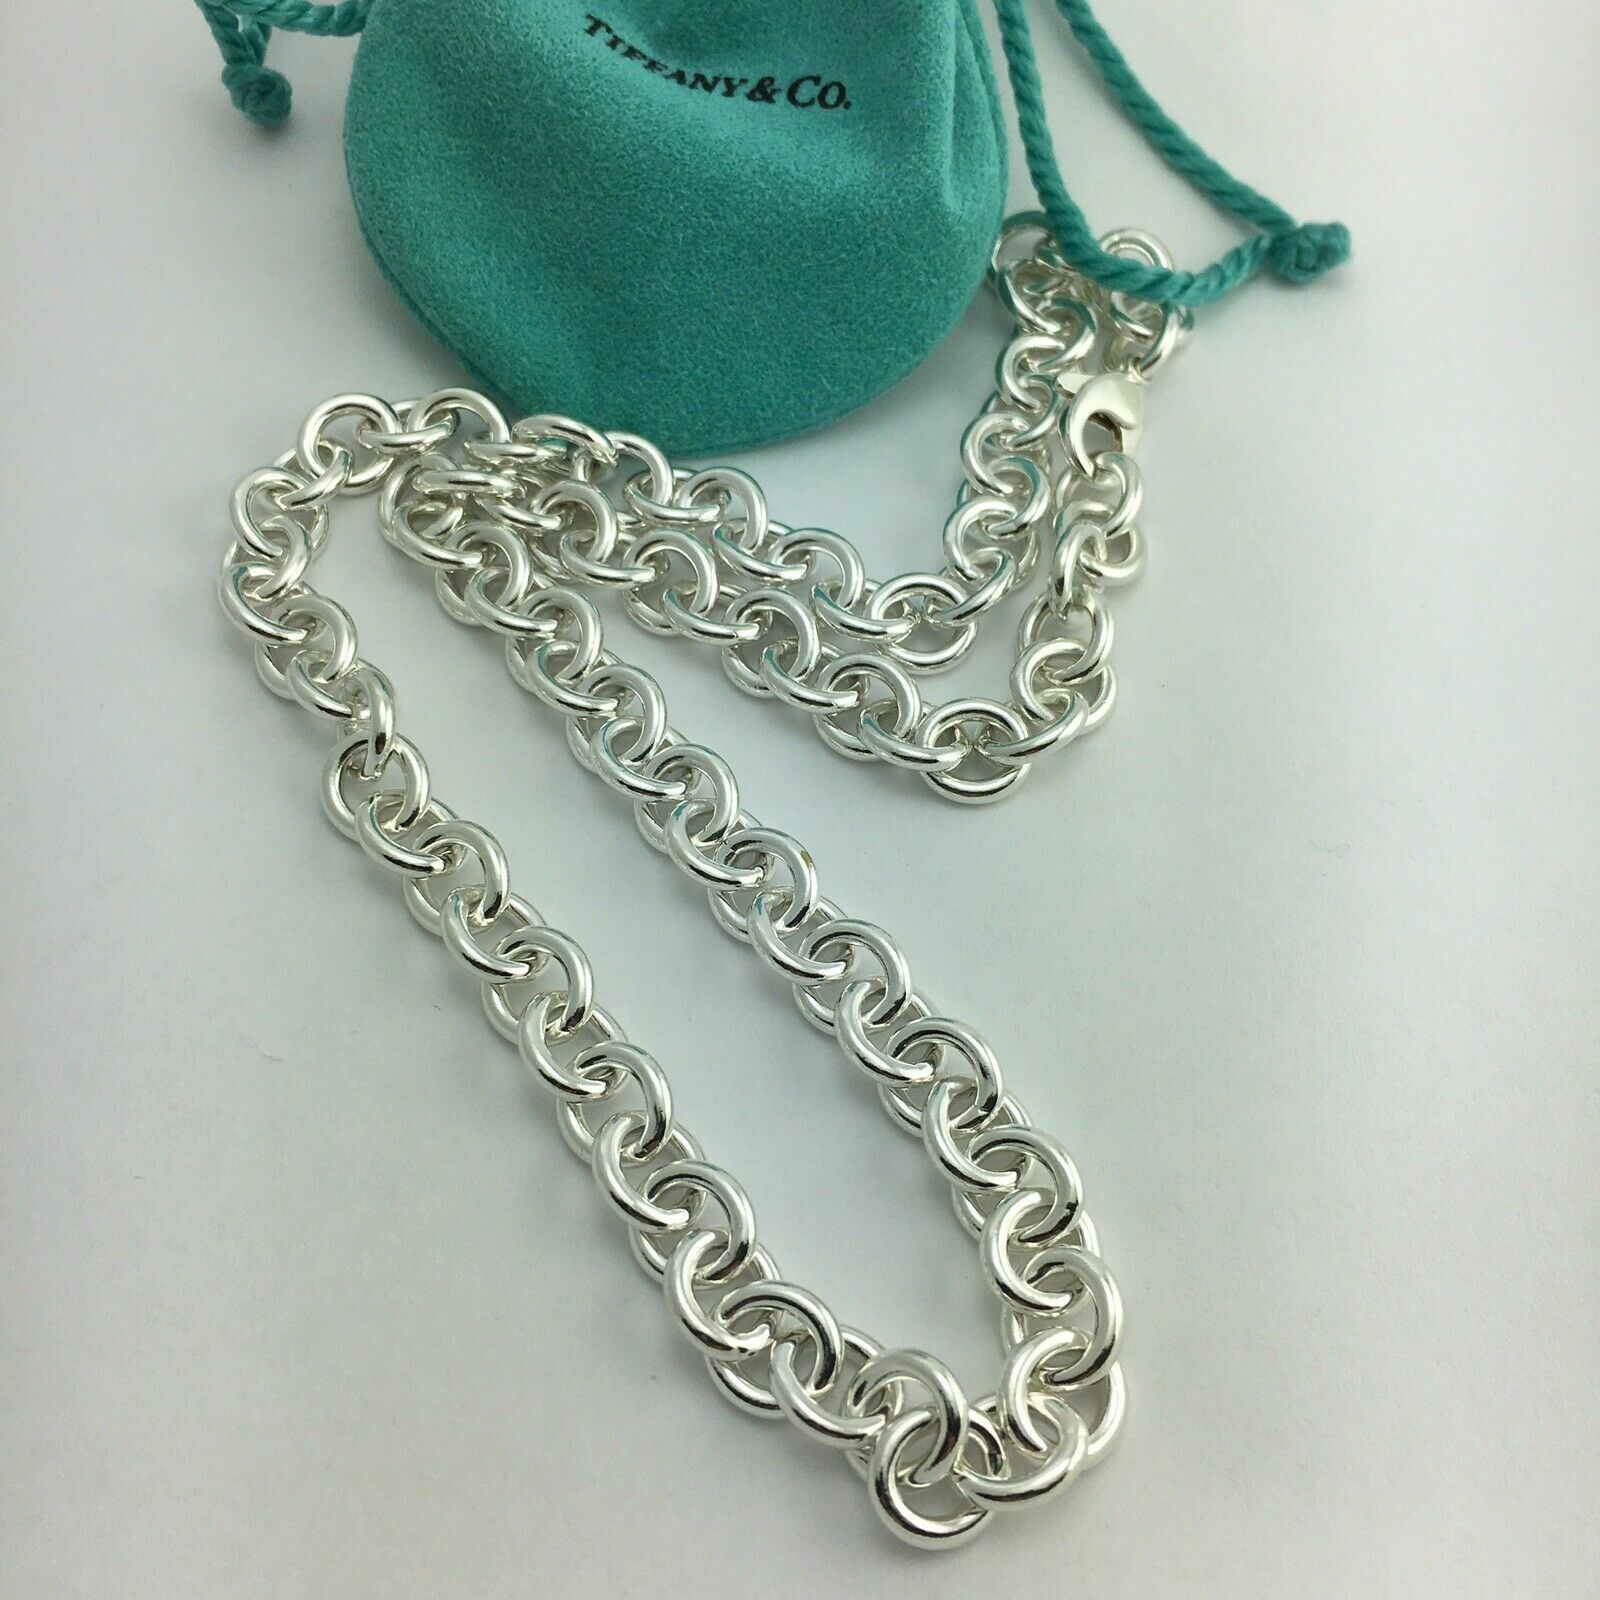 Tiffany & Co 24" Mens Unisex Silver Large Round Link Rolo Chain Necklace - $579.00